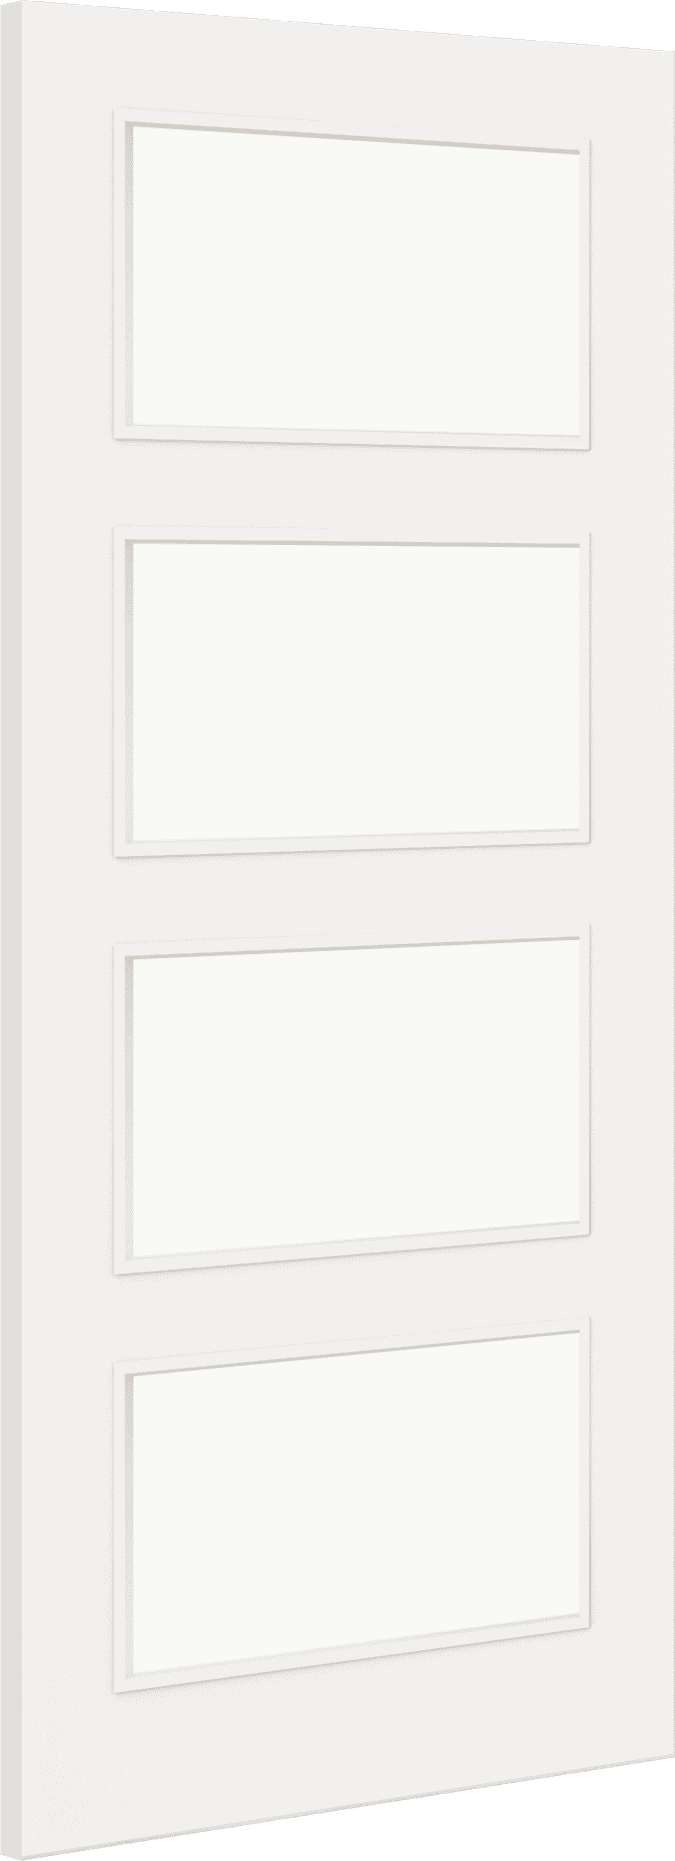 2040mm x 826mm x 44mm Architectural Paint Grade White 04 Clear Glazed Fire Door Blank